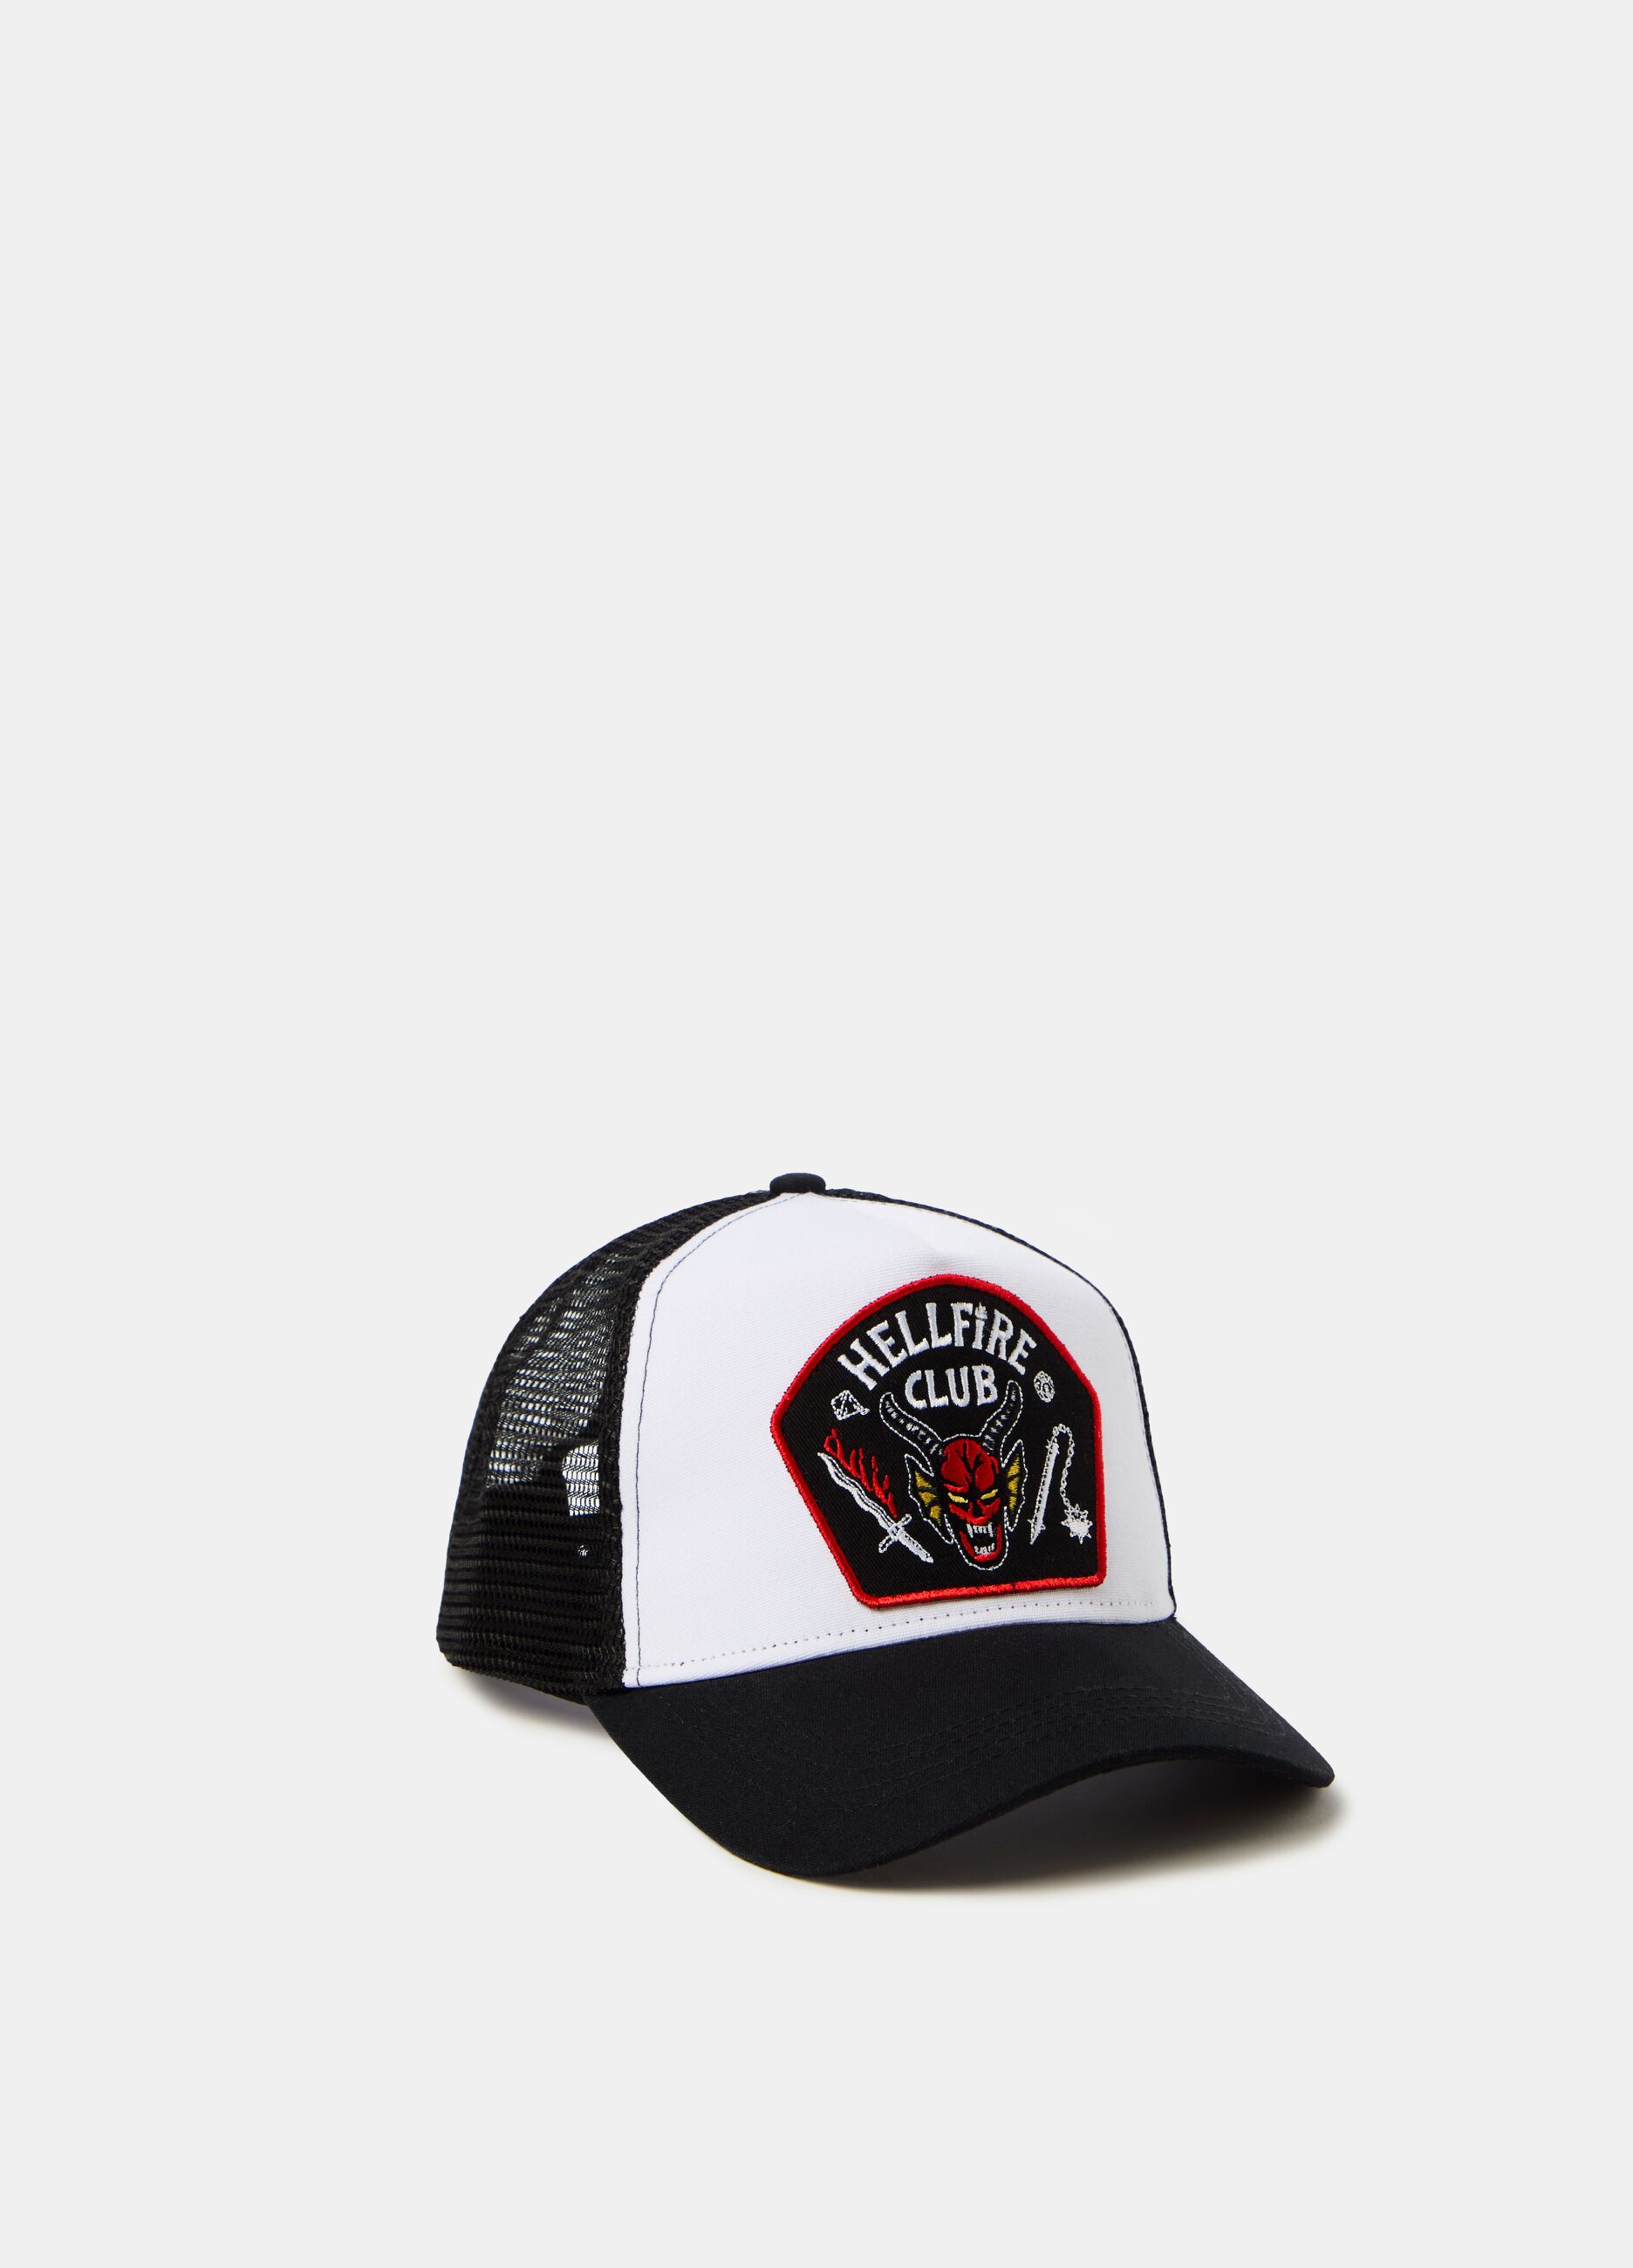 Baseball cap with Stranger Things patch